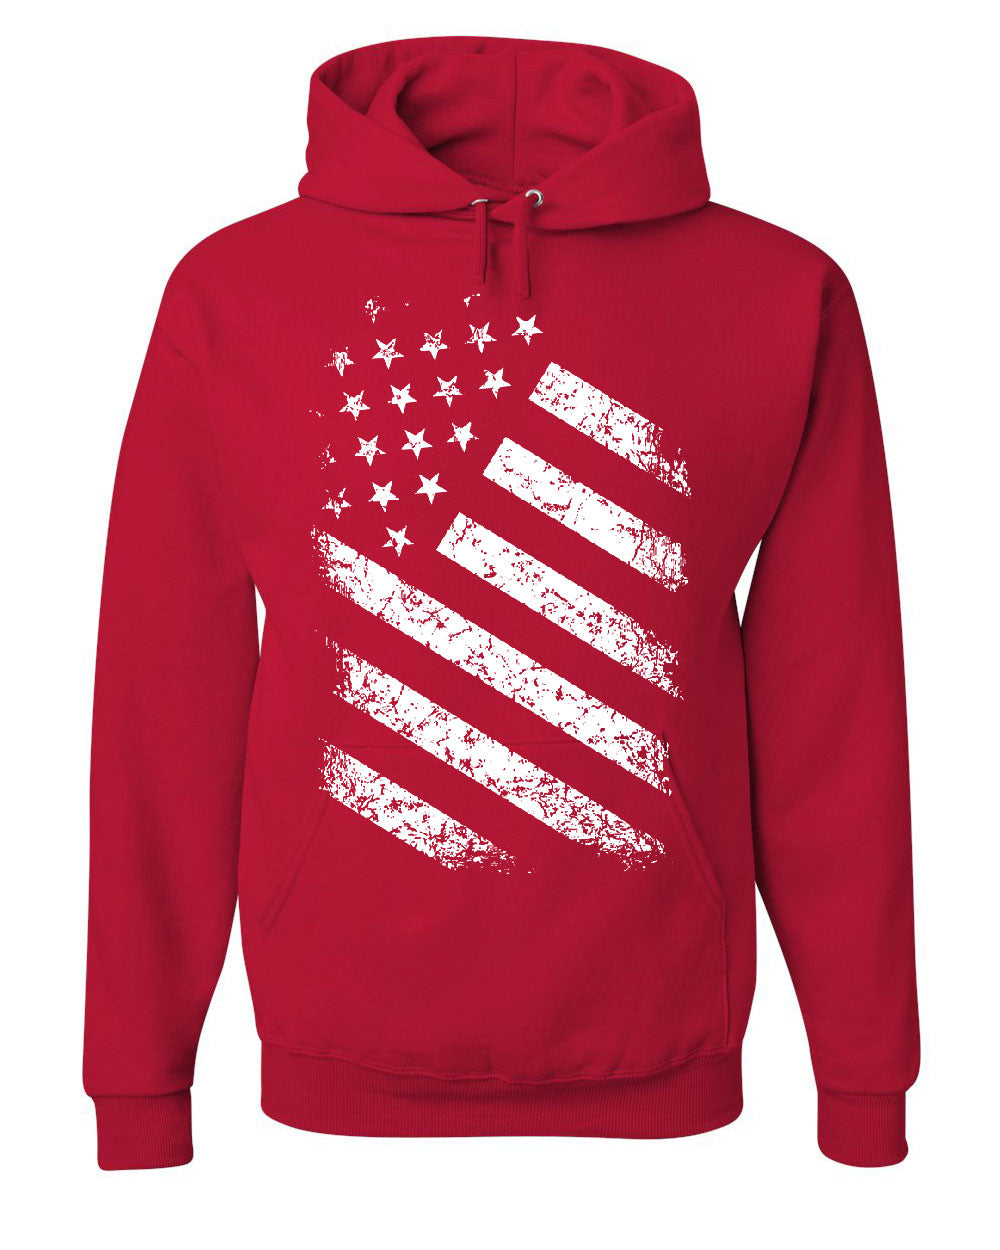 Stars And Stripes Hoodie 4th of July United States Flag Pride